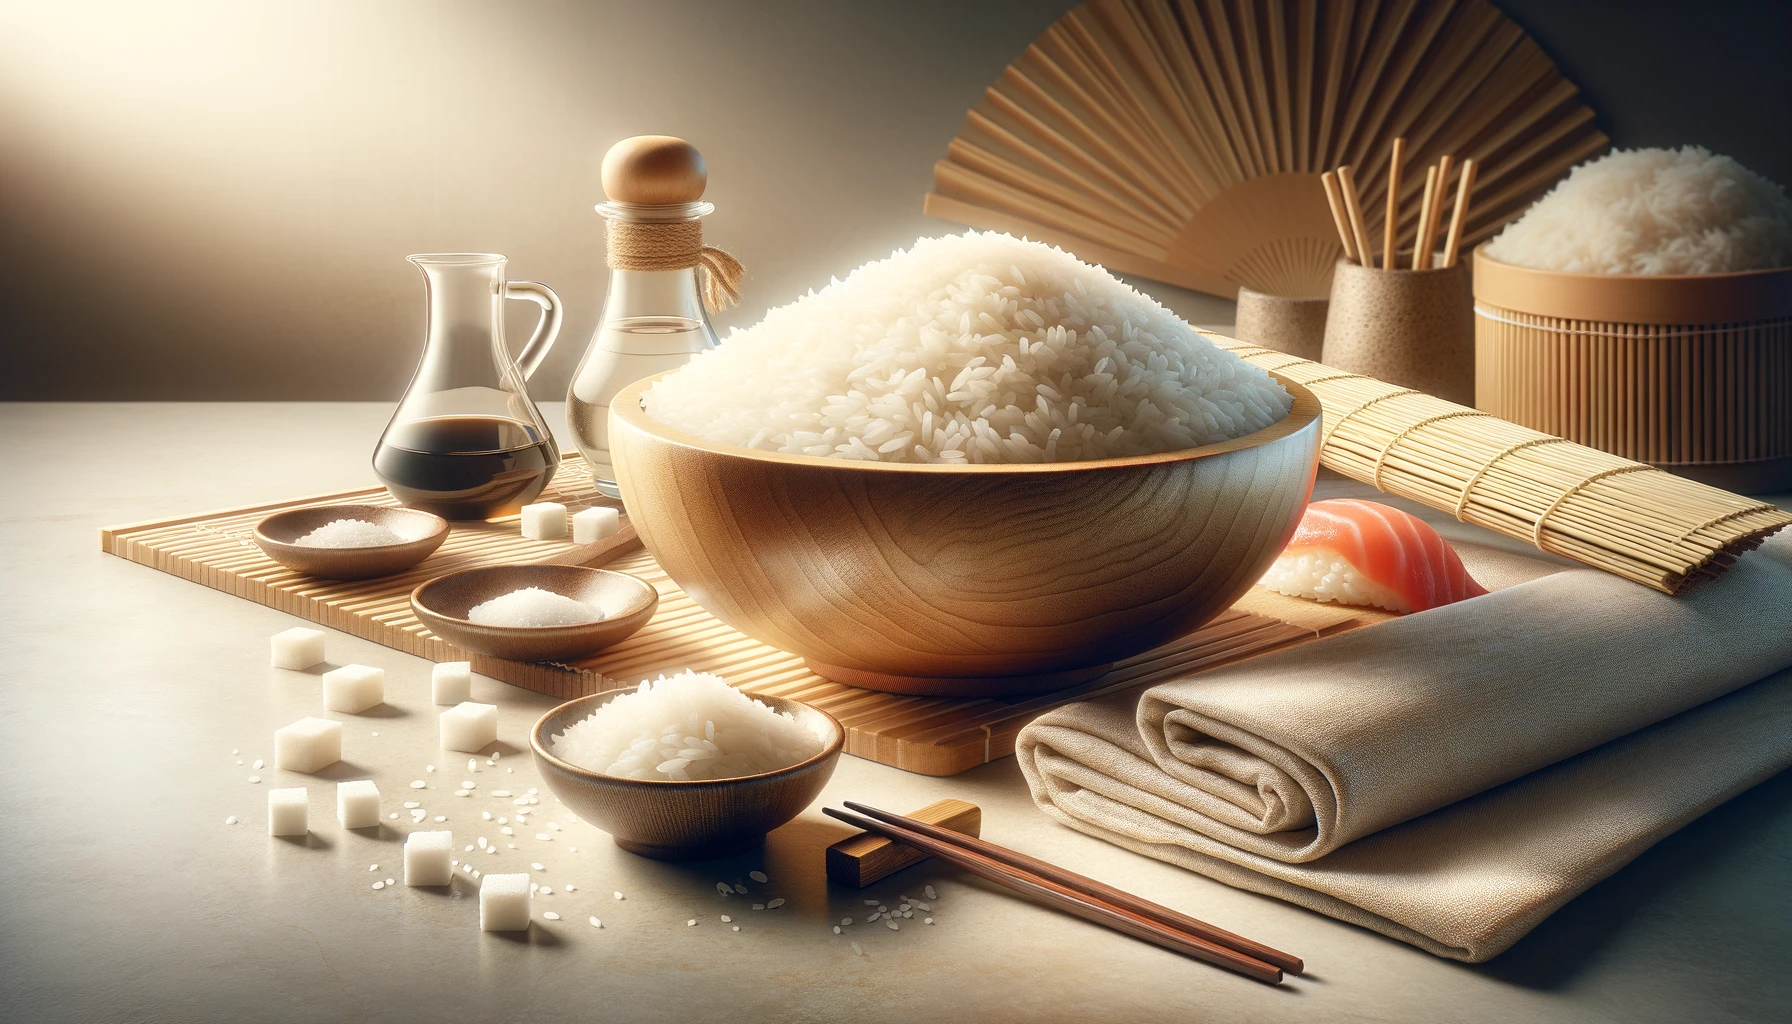 sushi-making scene with a focus on freshly made sushi rice in a wooden bowl, accompanied by ingredients like rice vinegar, sugar, and salt